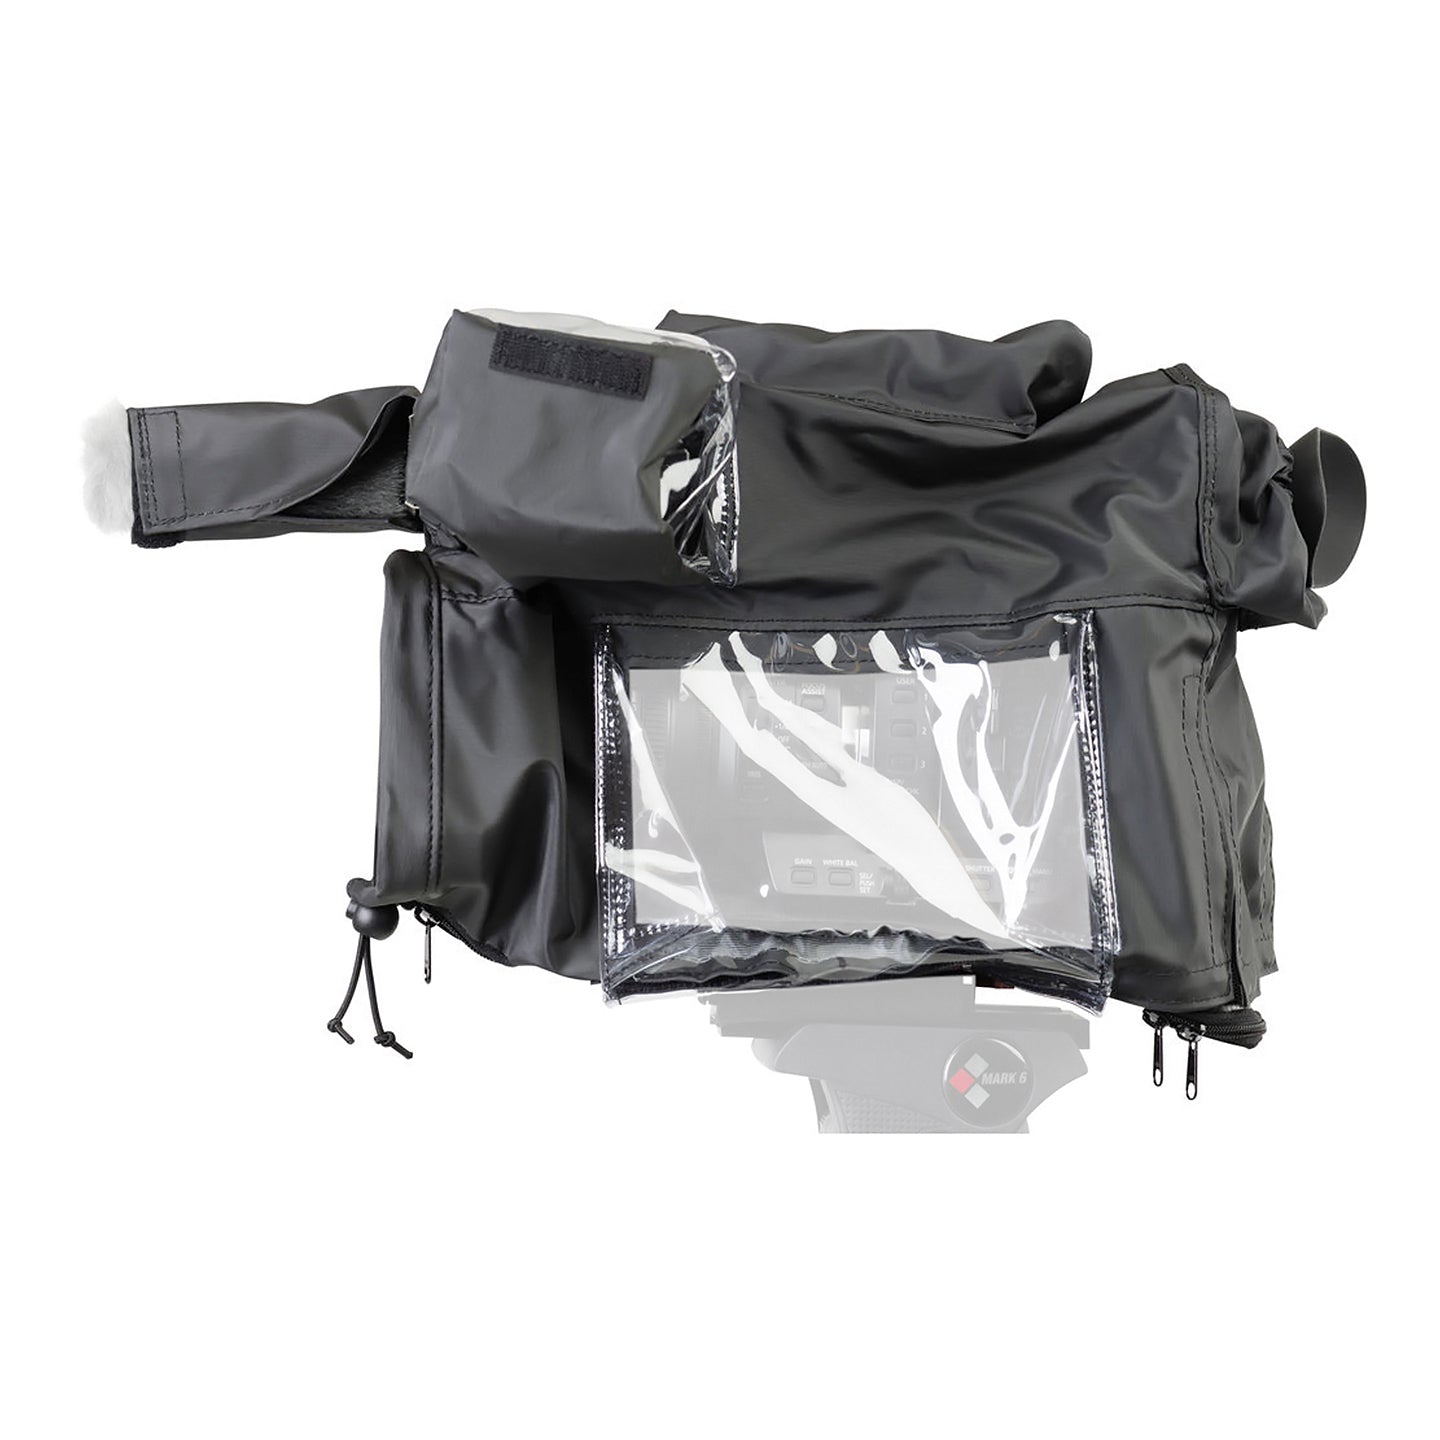 CamRade WetSuit Flexible Rain Cover for Panasonic AG-UX90 / AG-UX180 Camcorders with Clear Vinyl Windows for Visibility